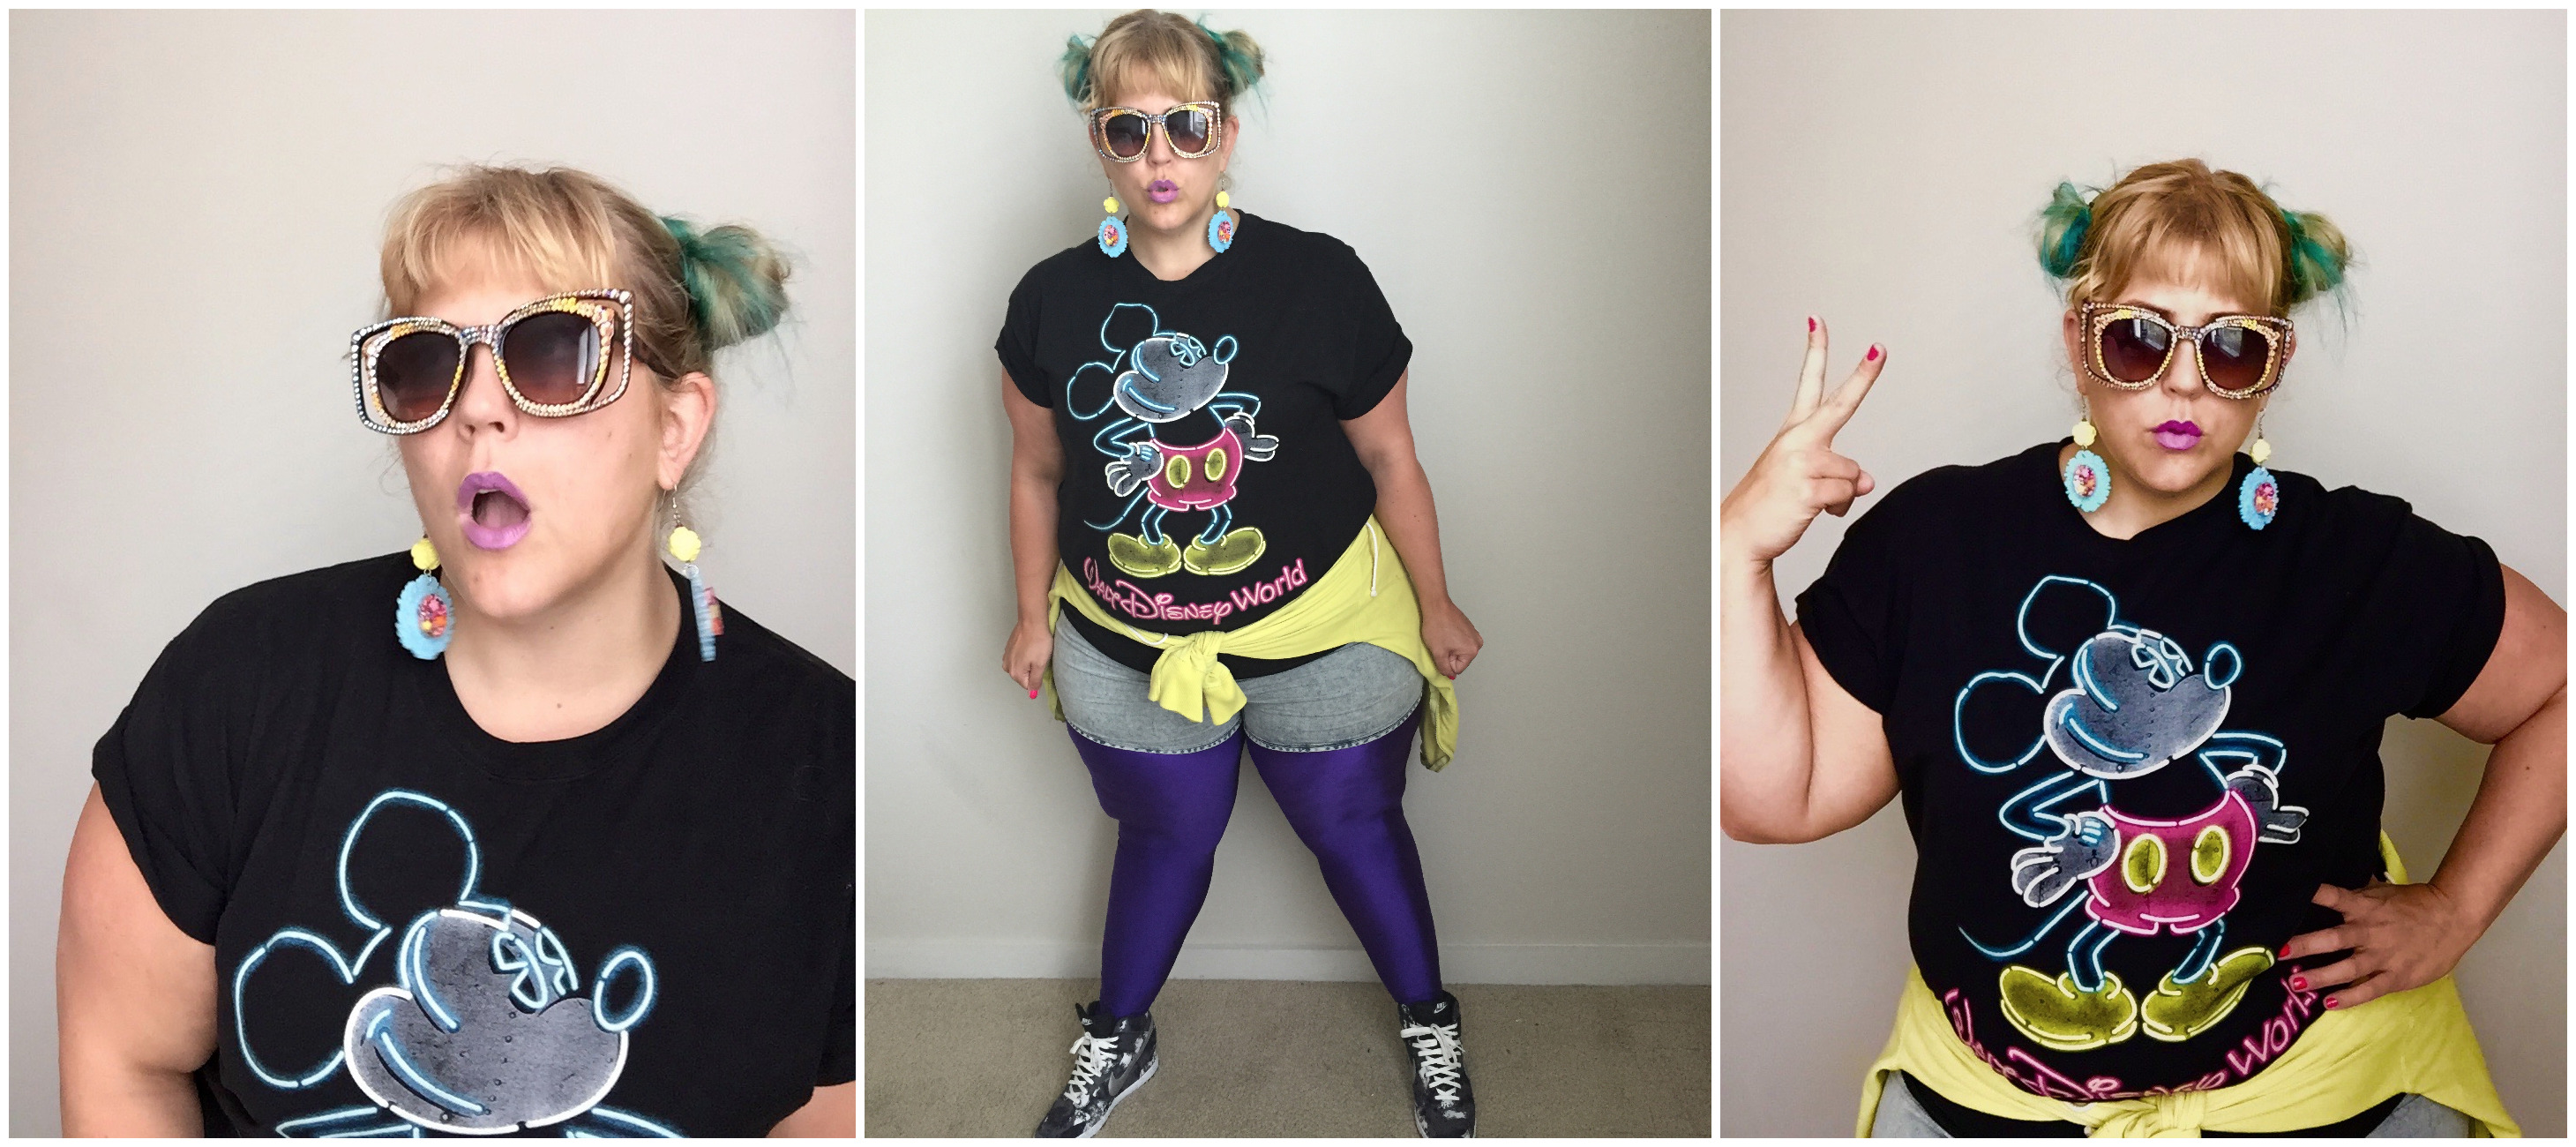 Plus Size Fashion Round Up: What I Wore this Week - Glitter + Lazers